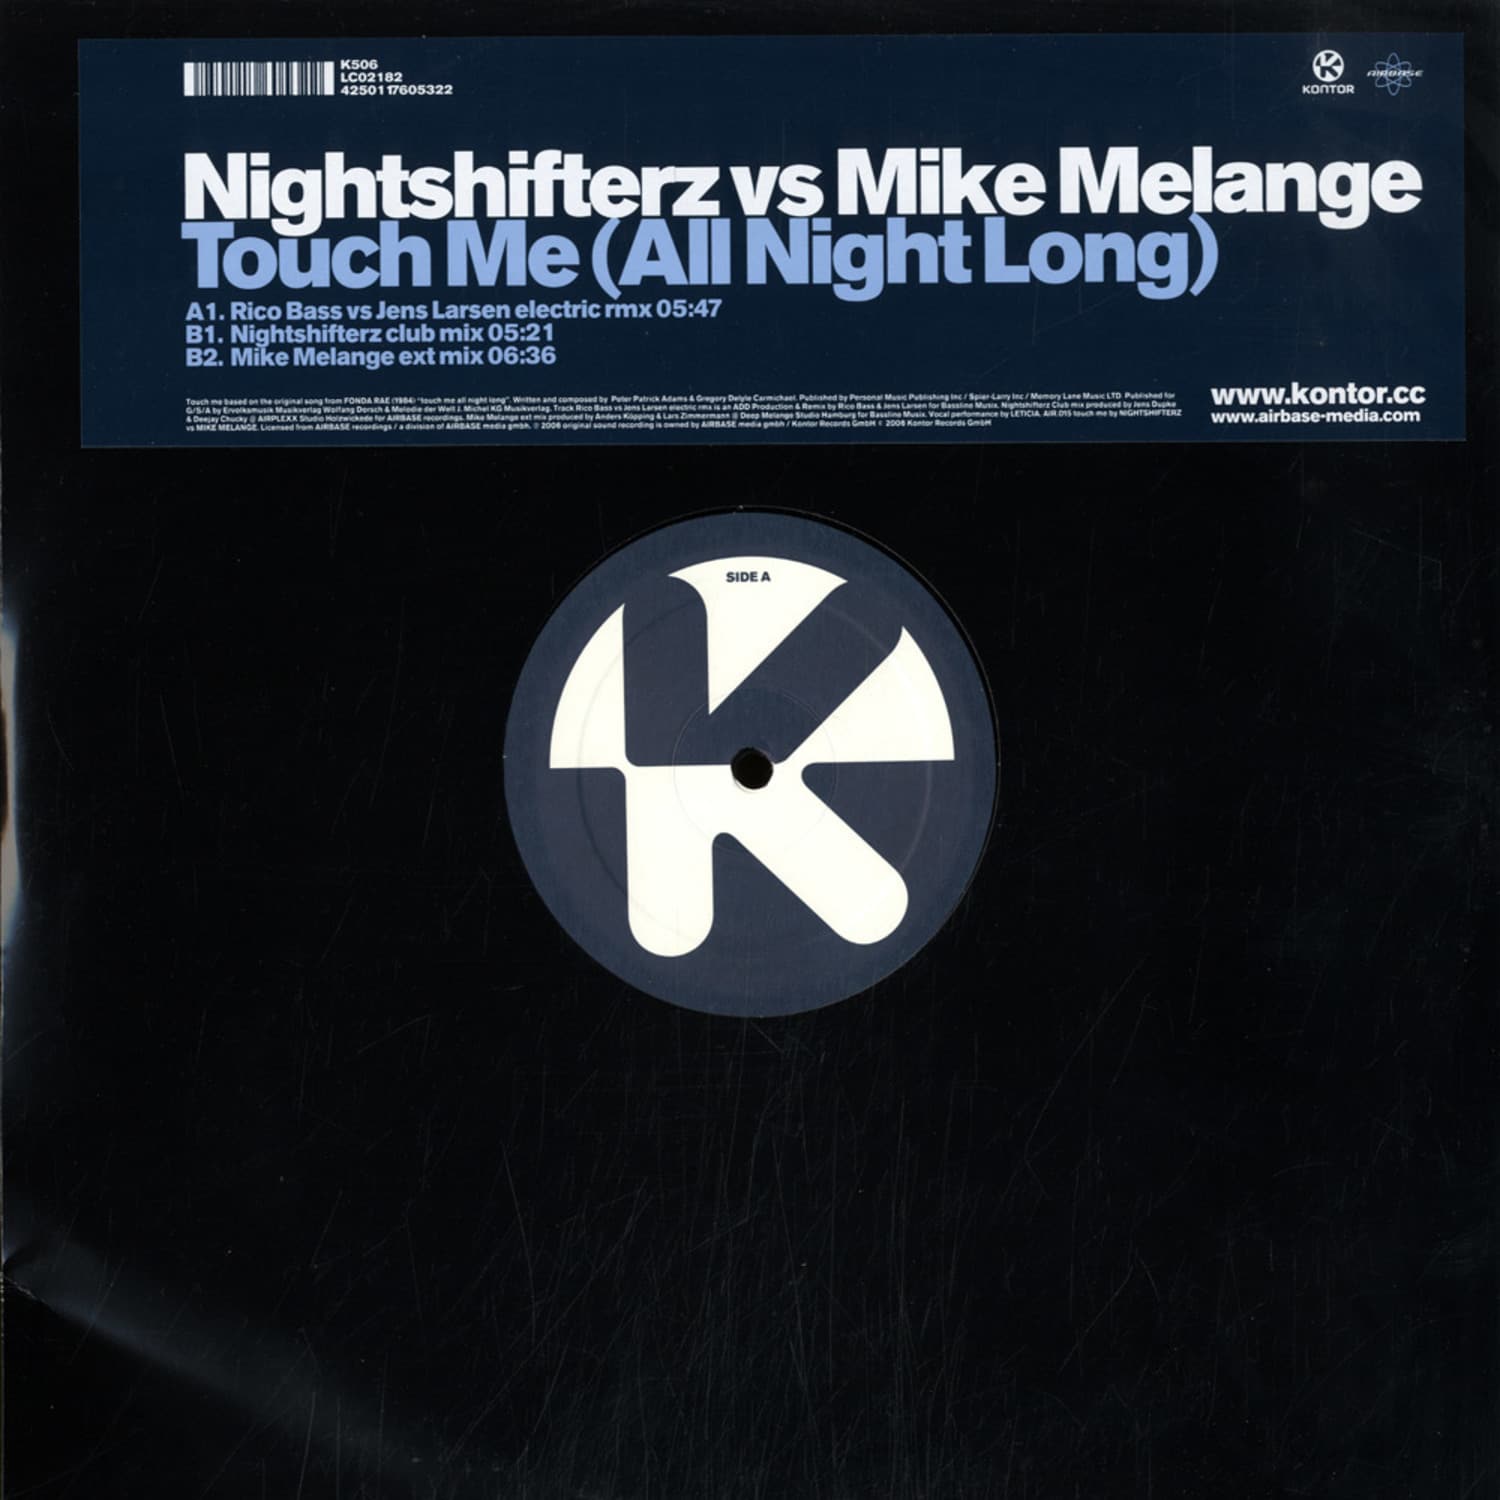 Nightshifterz vs Mike Melange - TOUCH ME 